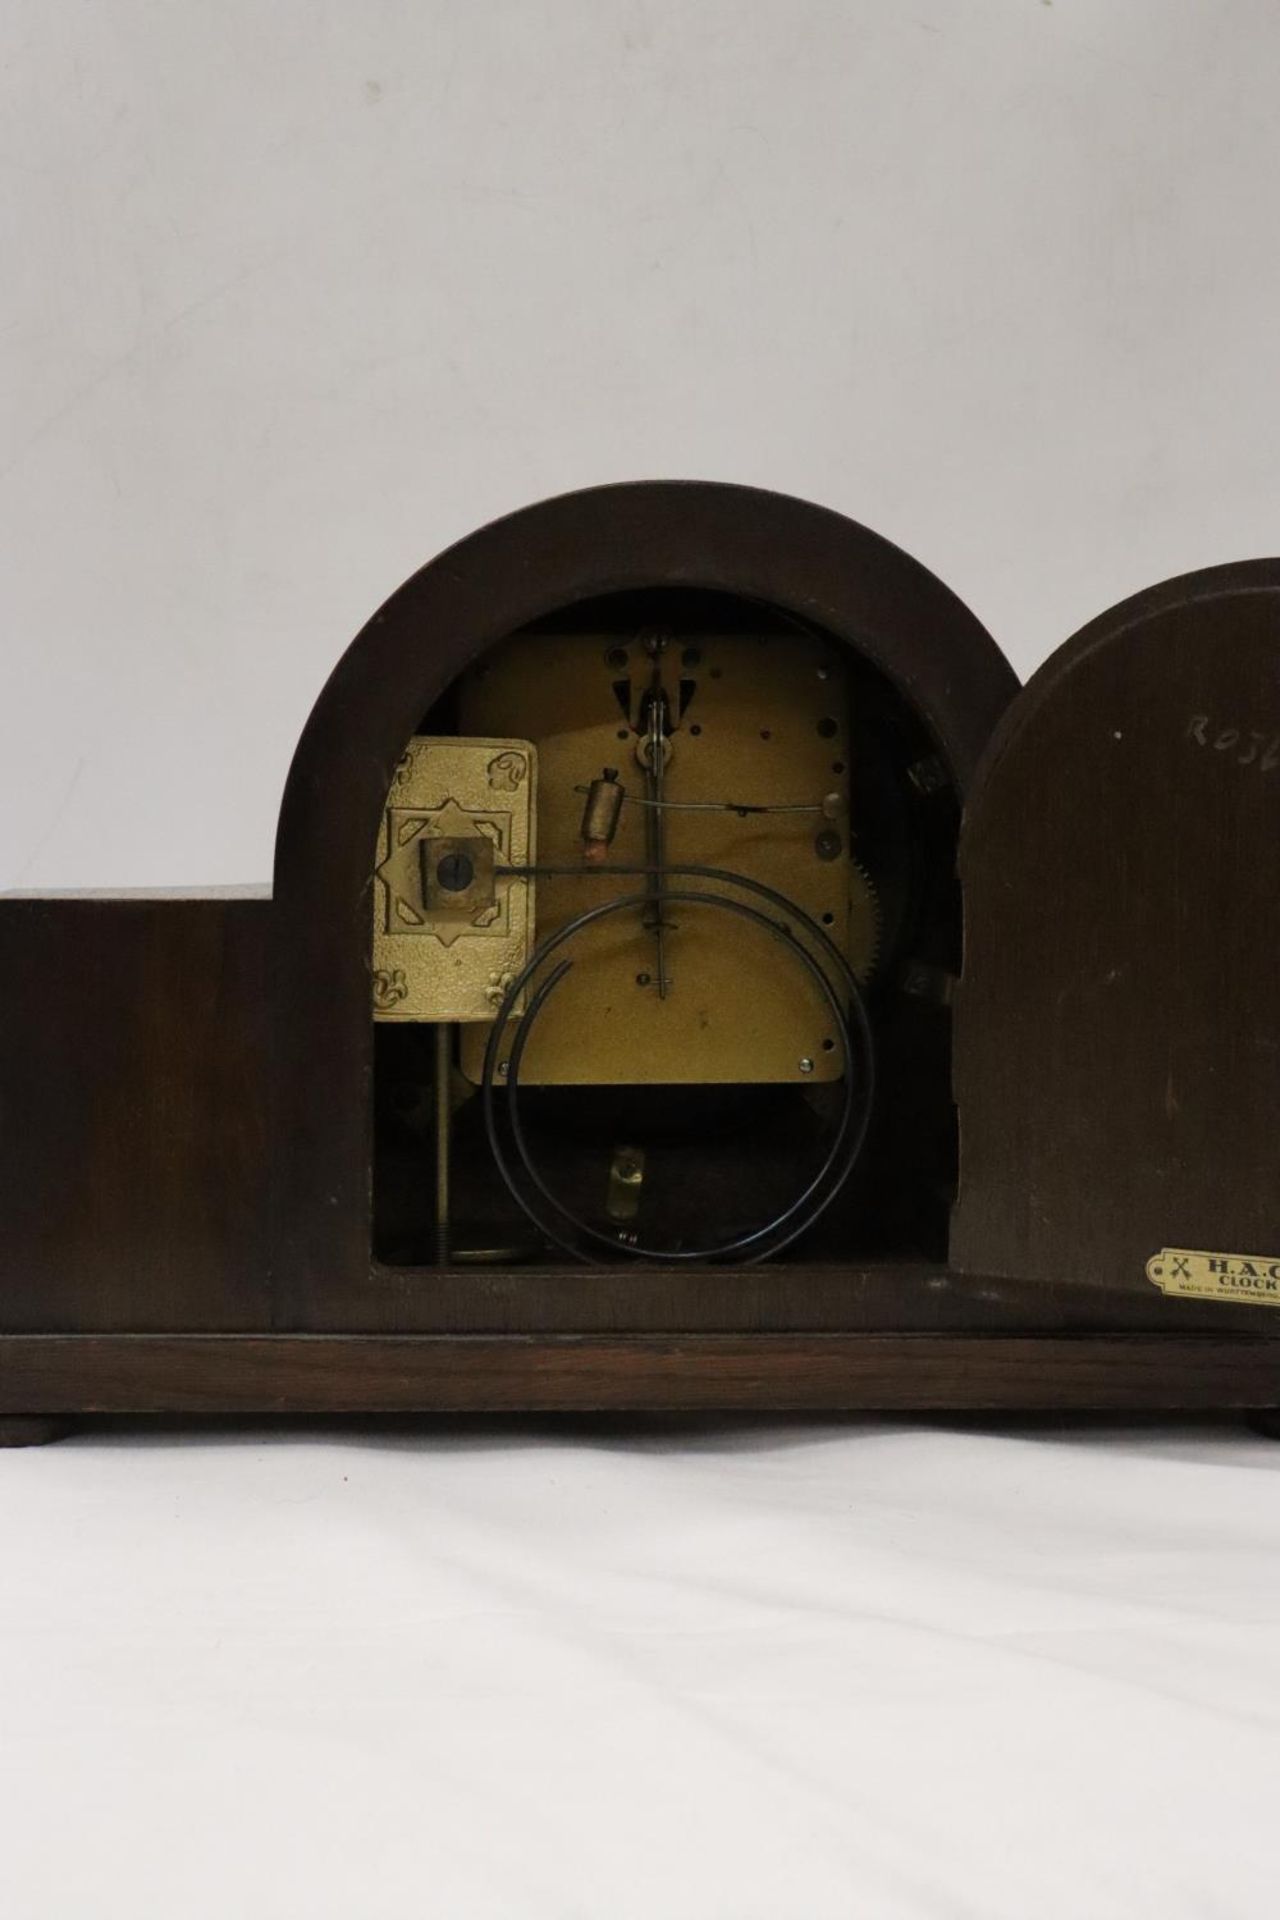 A VINTAGE GERMAN MANTLE CLOCK IN WORKING ORDER AT CATALOGUING, NO WARRANTY GIVEN - Image 6 of 6